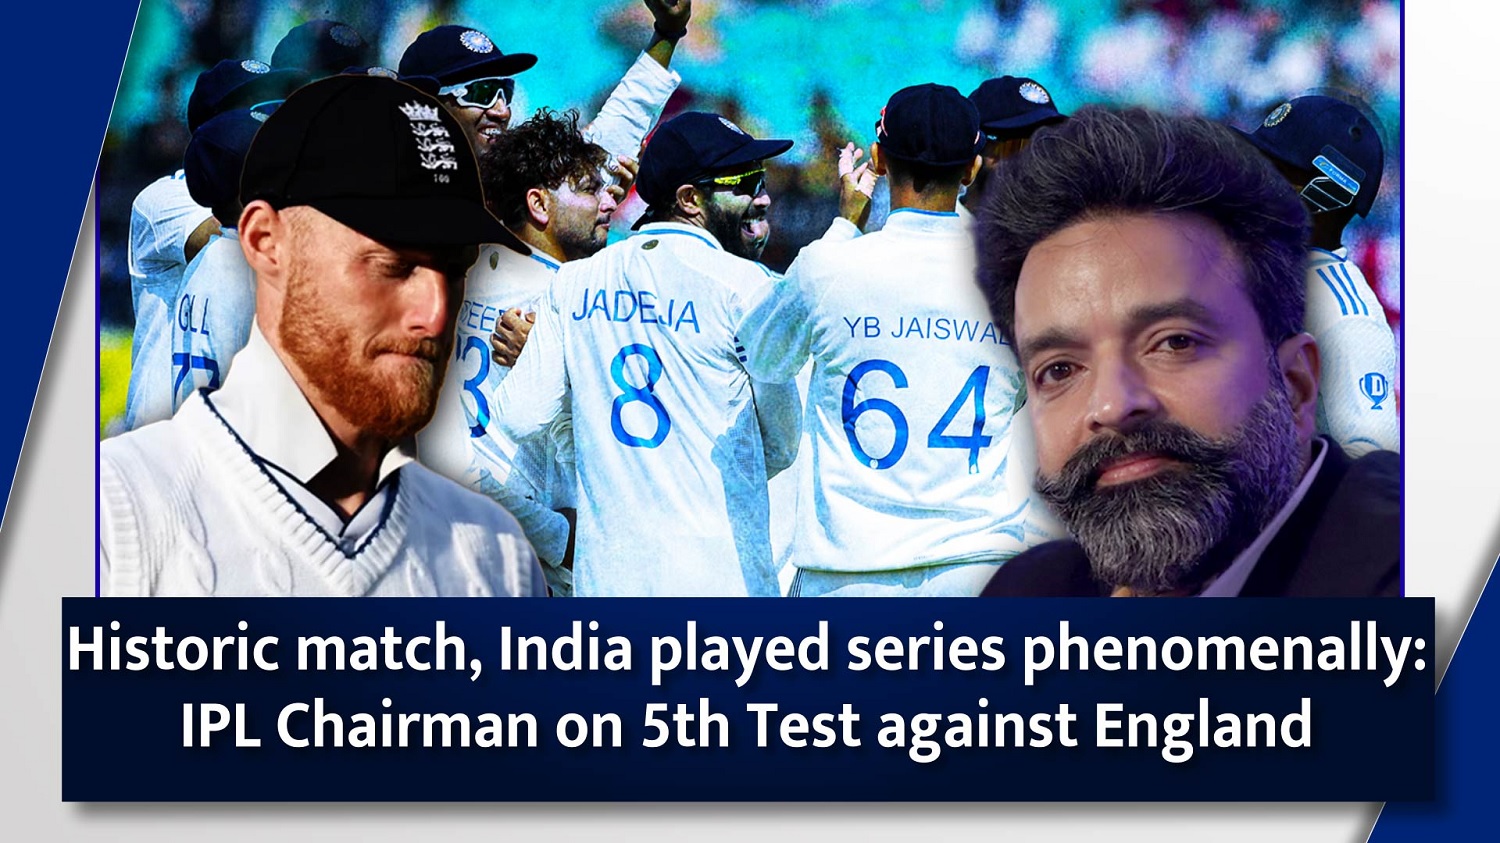 Historic match` India played series phenomenally` IPL Chairman on 5th Test against England